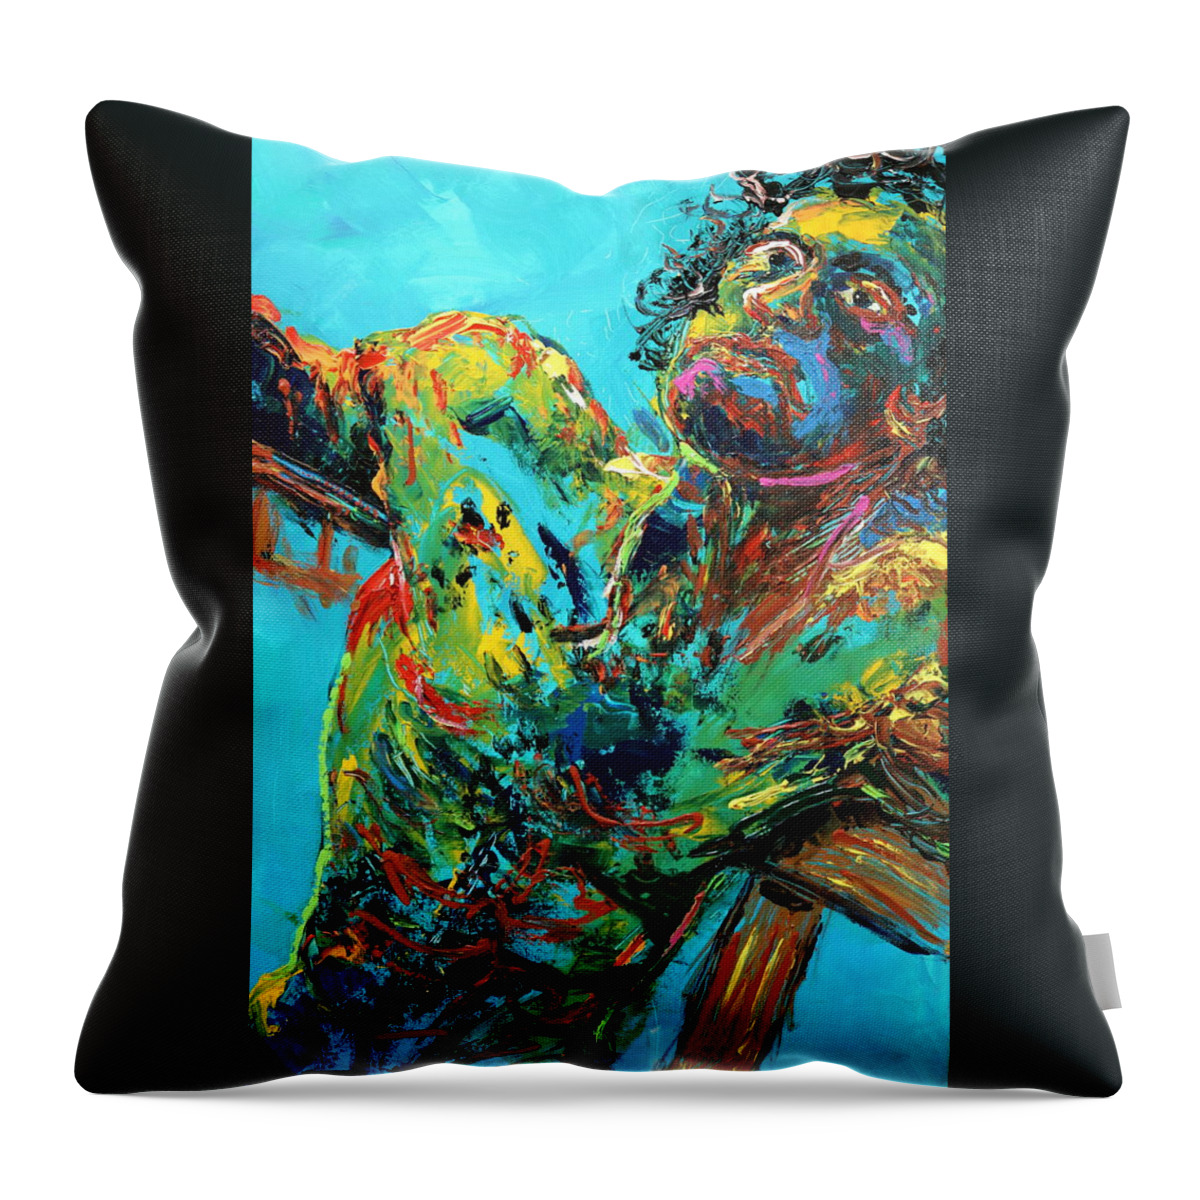 Portraits Throw Pillow featuring the painting Holding On by Madeleine Shulman